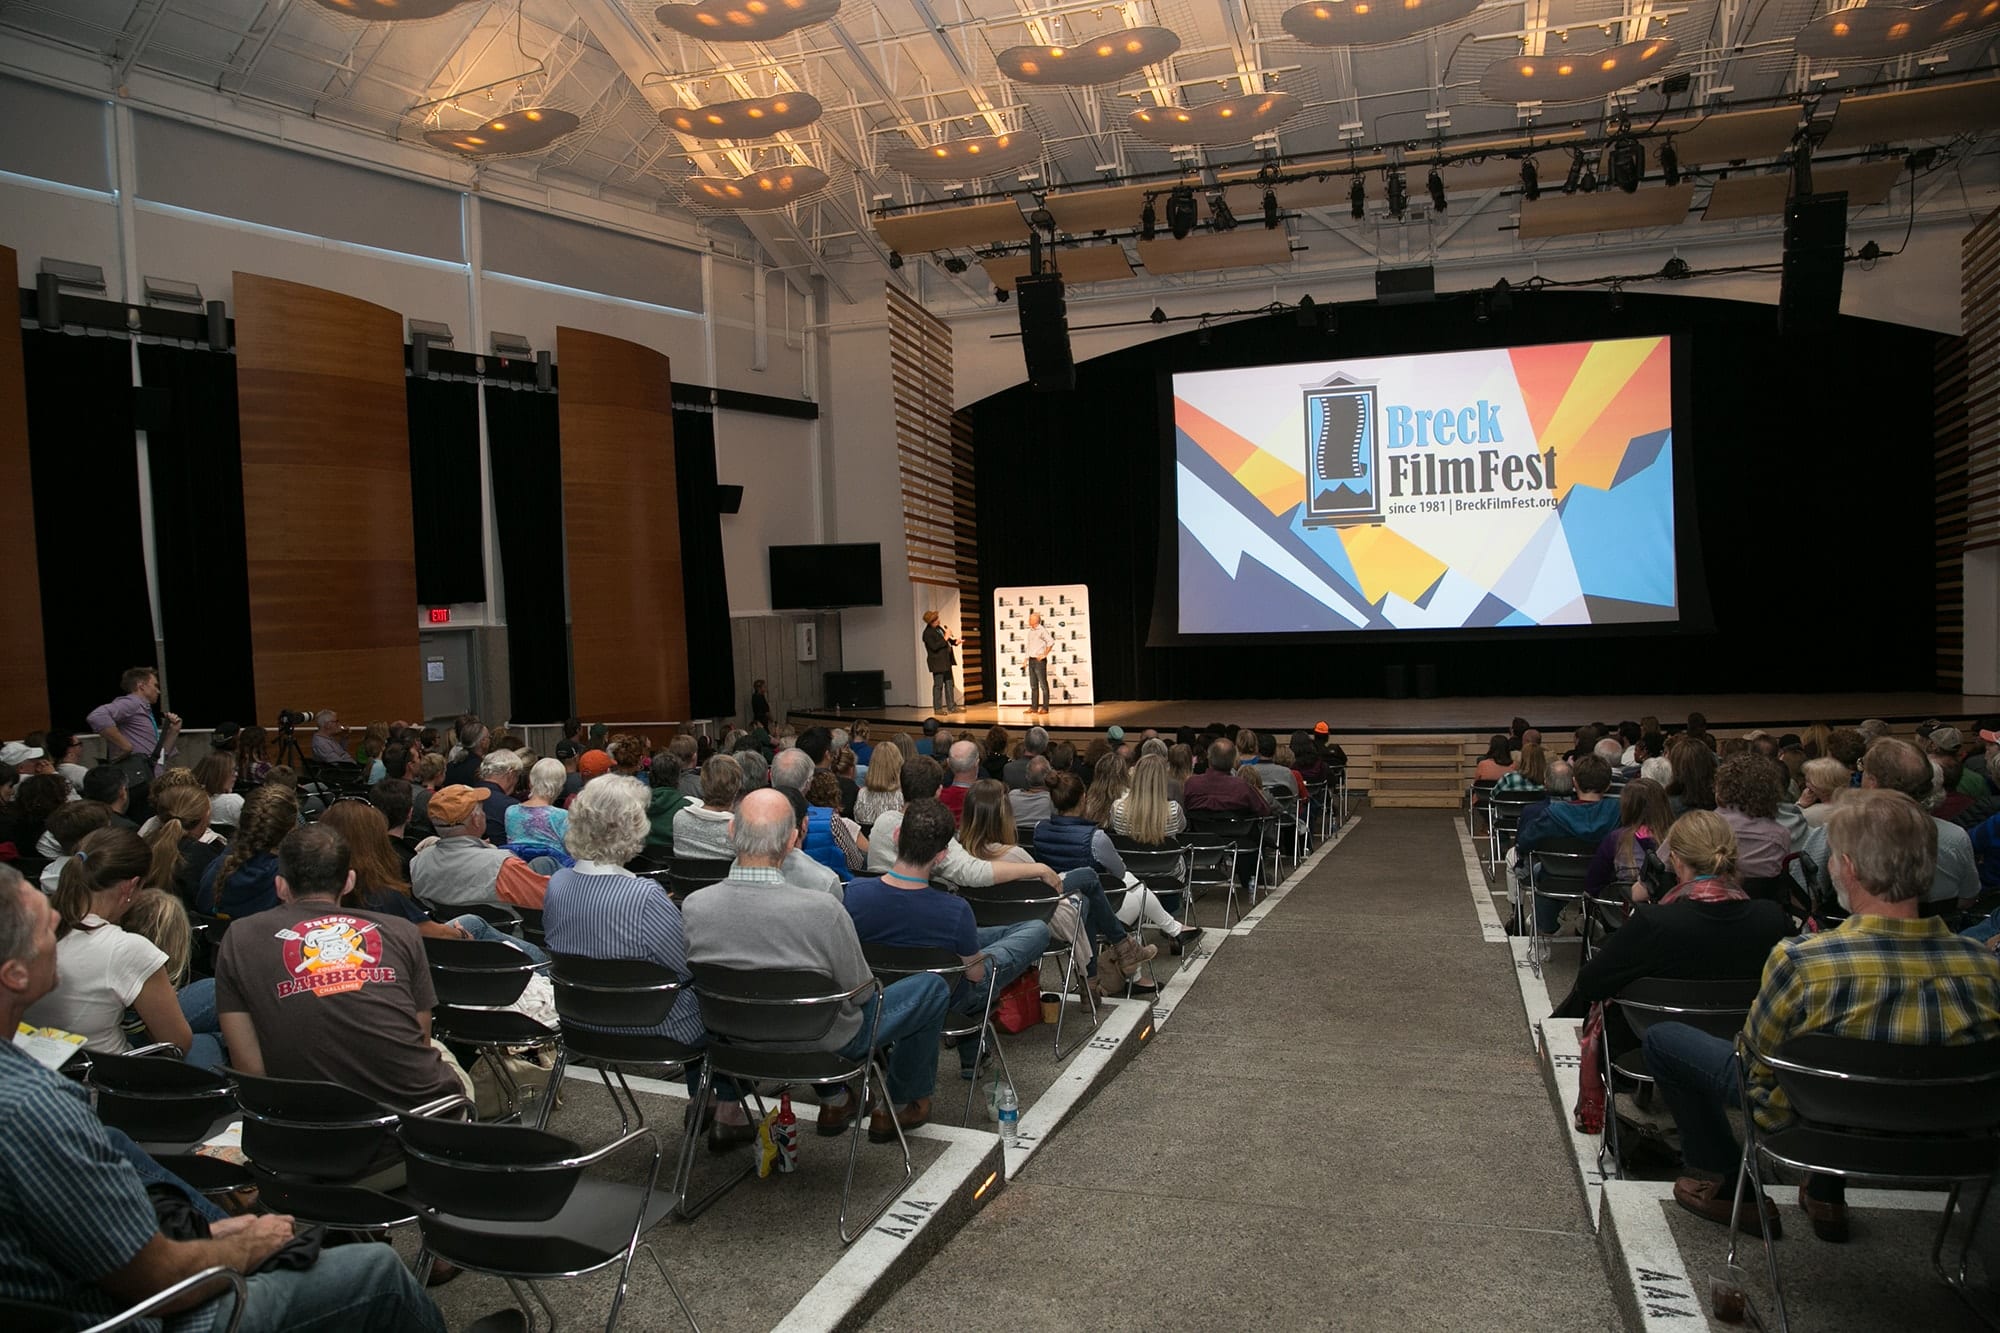 Audience at the annual Breck Film Fest which celebrates the art of filmmaking.